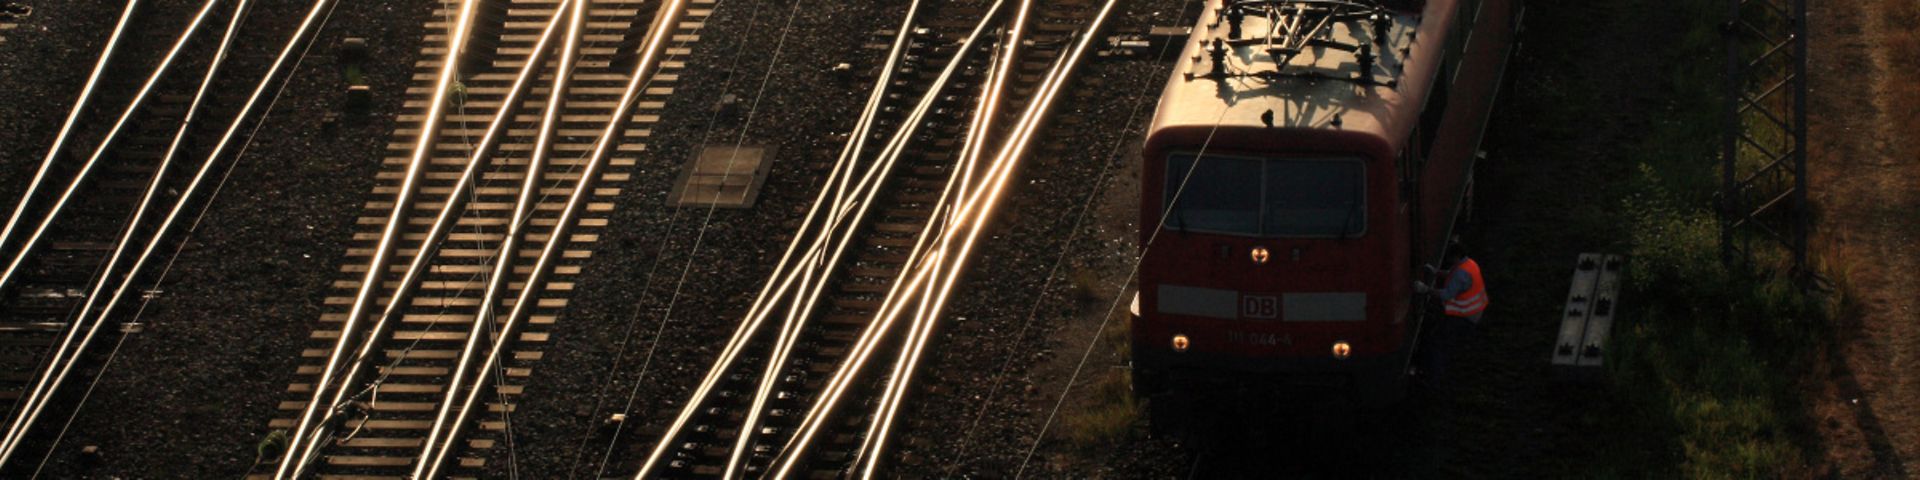 Track system of the Munich Main Station at dusk